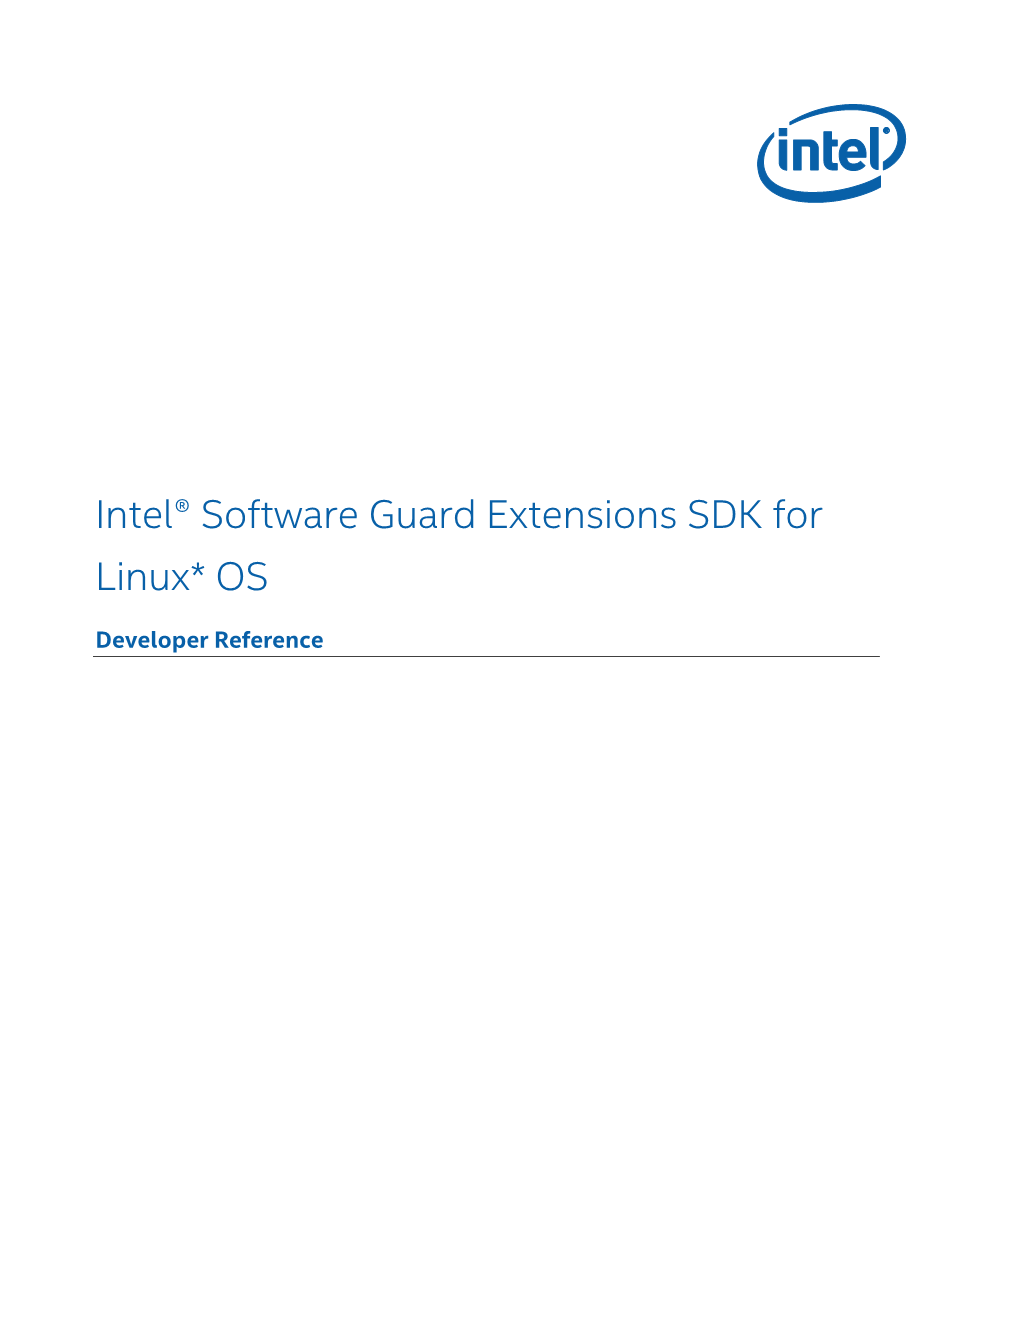 Software Guard Extensions SDK Developer Reference for Linux* OS